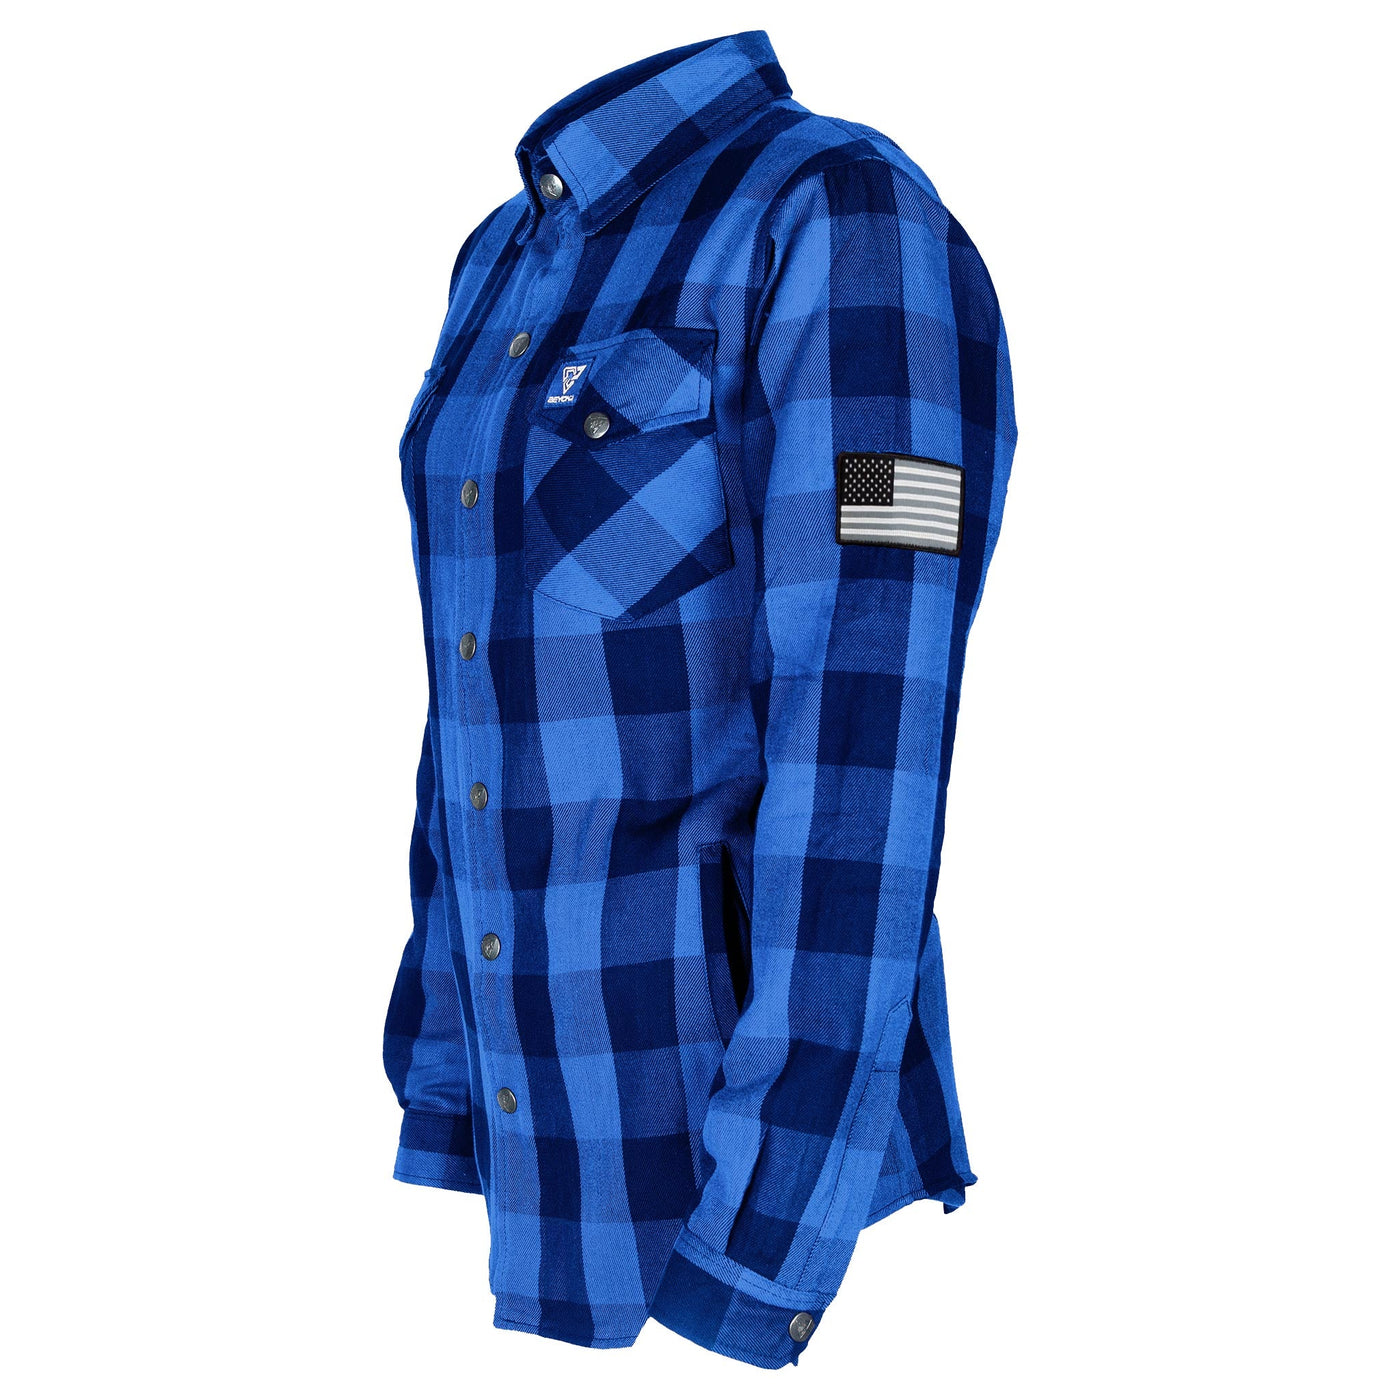 Protective Flannel Shirt with Pads for Women - Blue Checkered